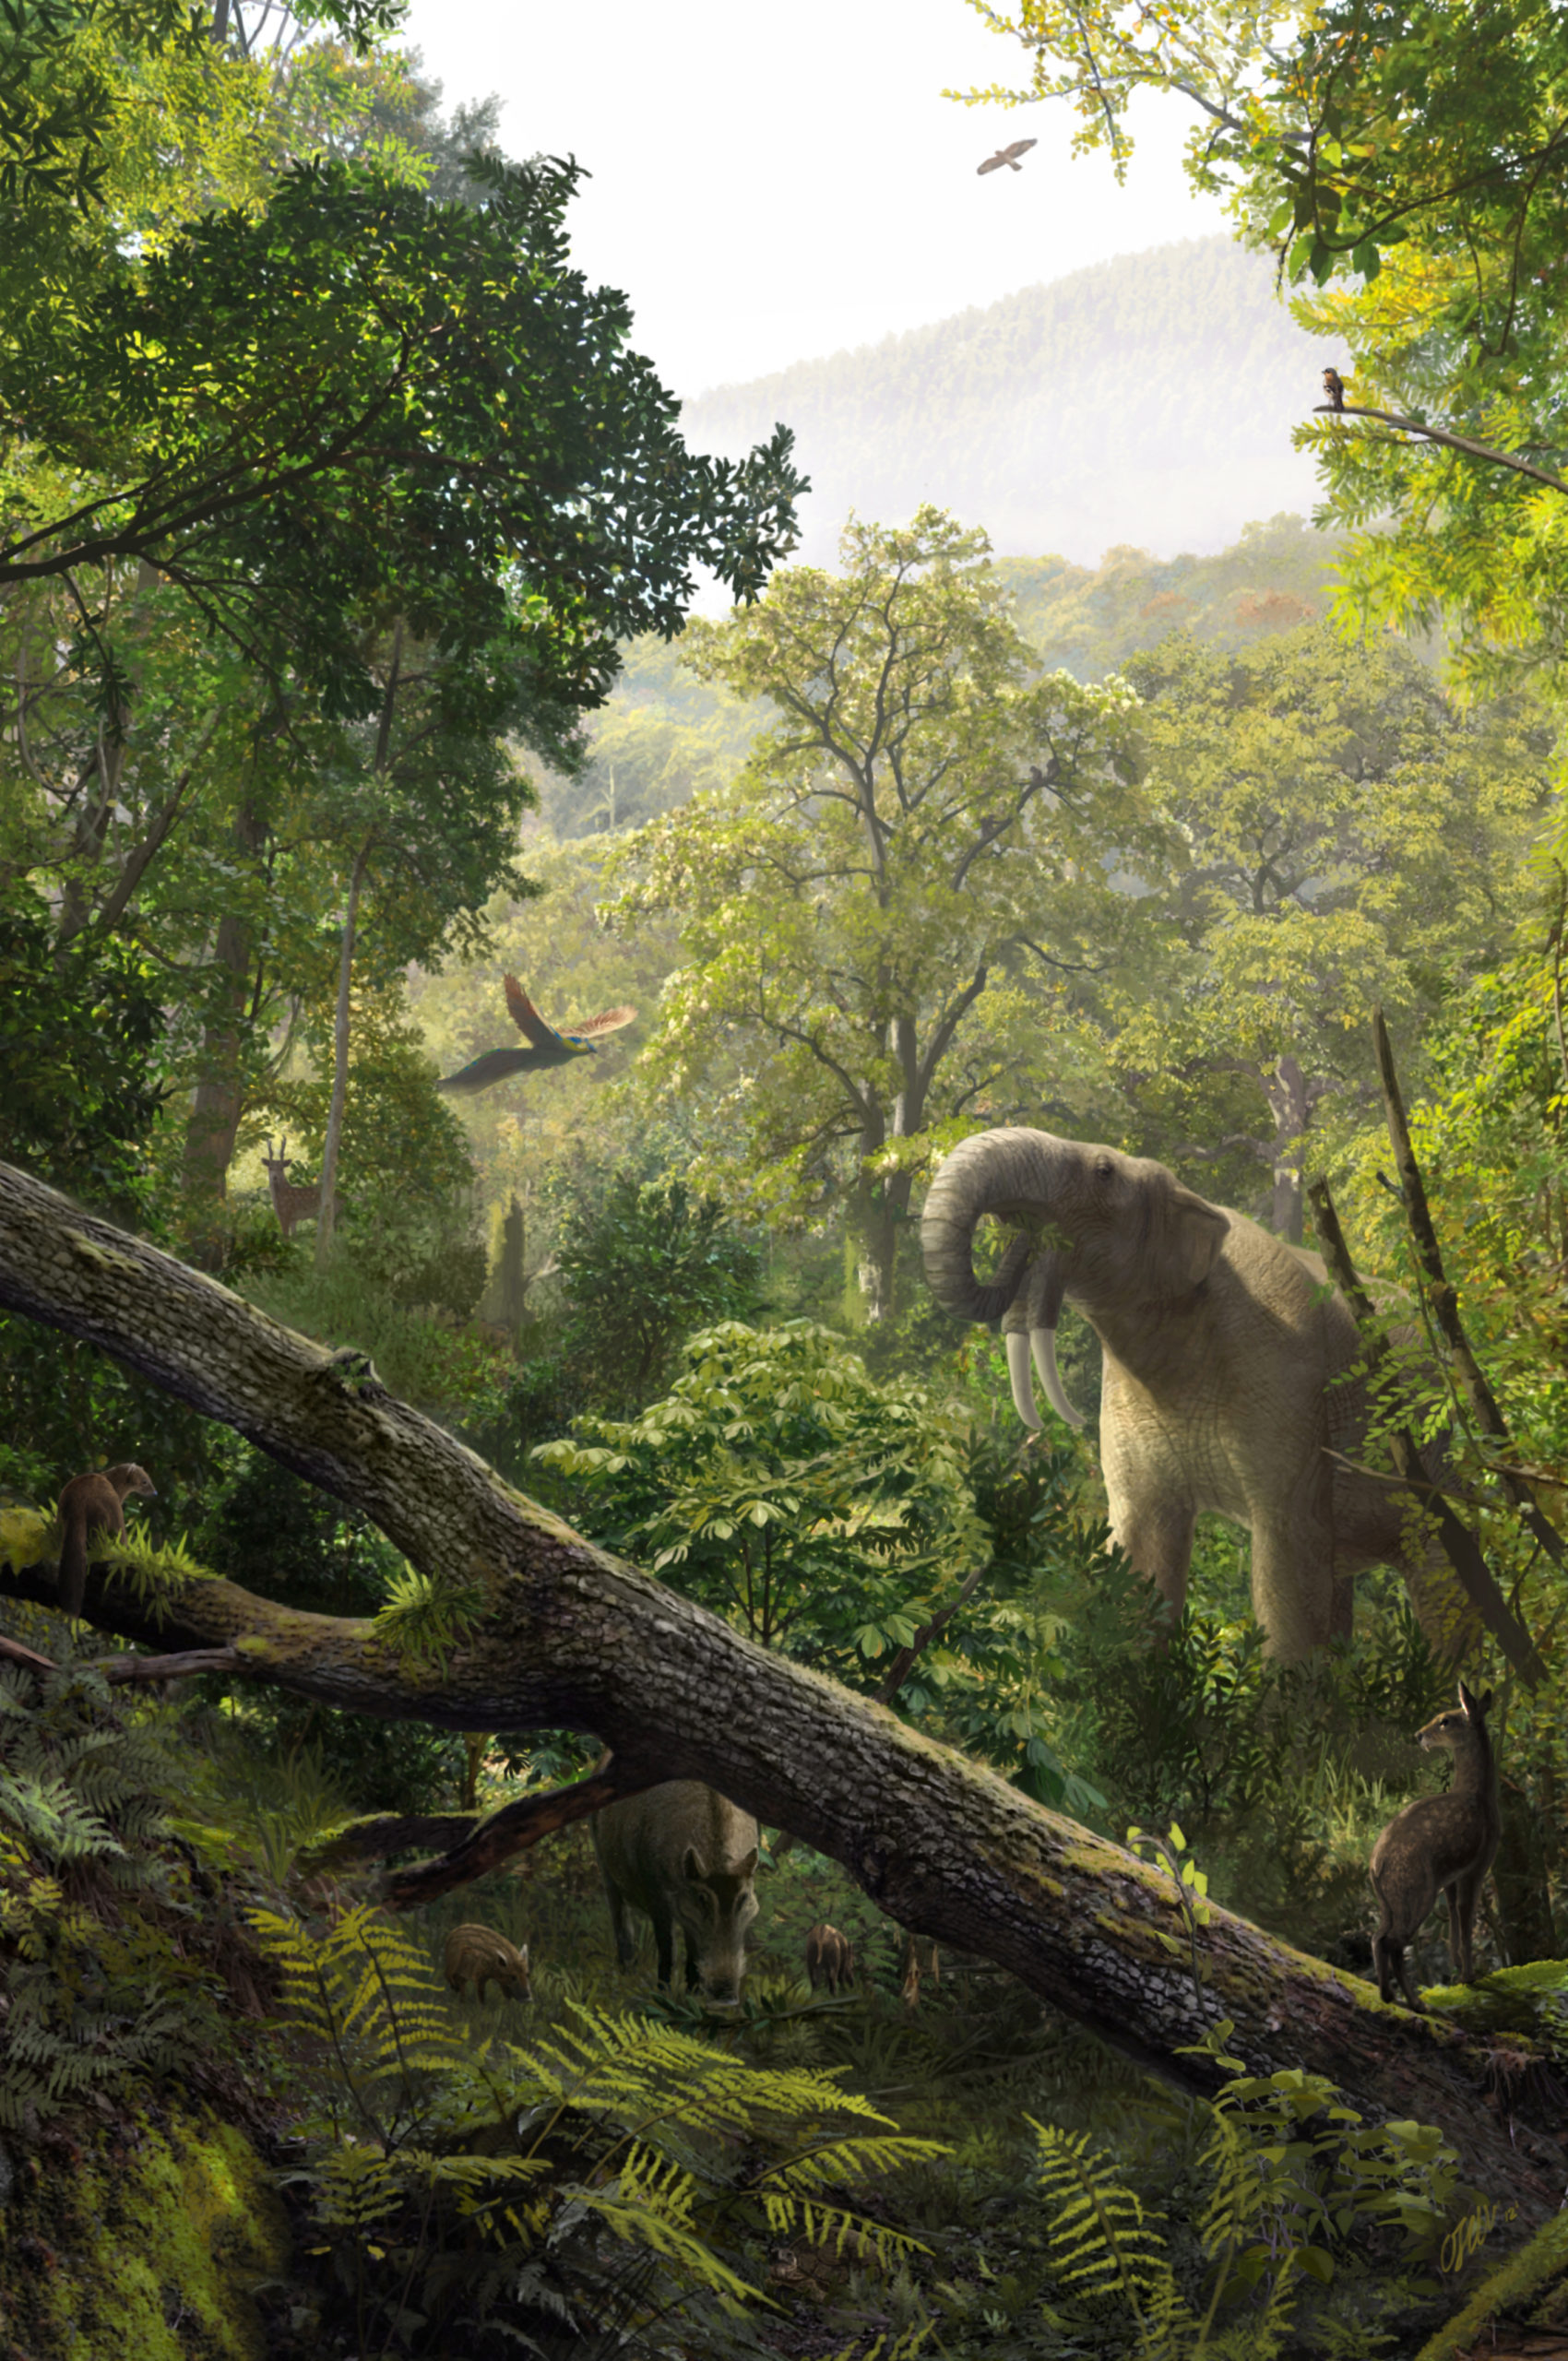 This Extinct Species Is Changing What We Know About Early Ape Evolution